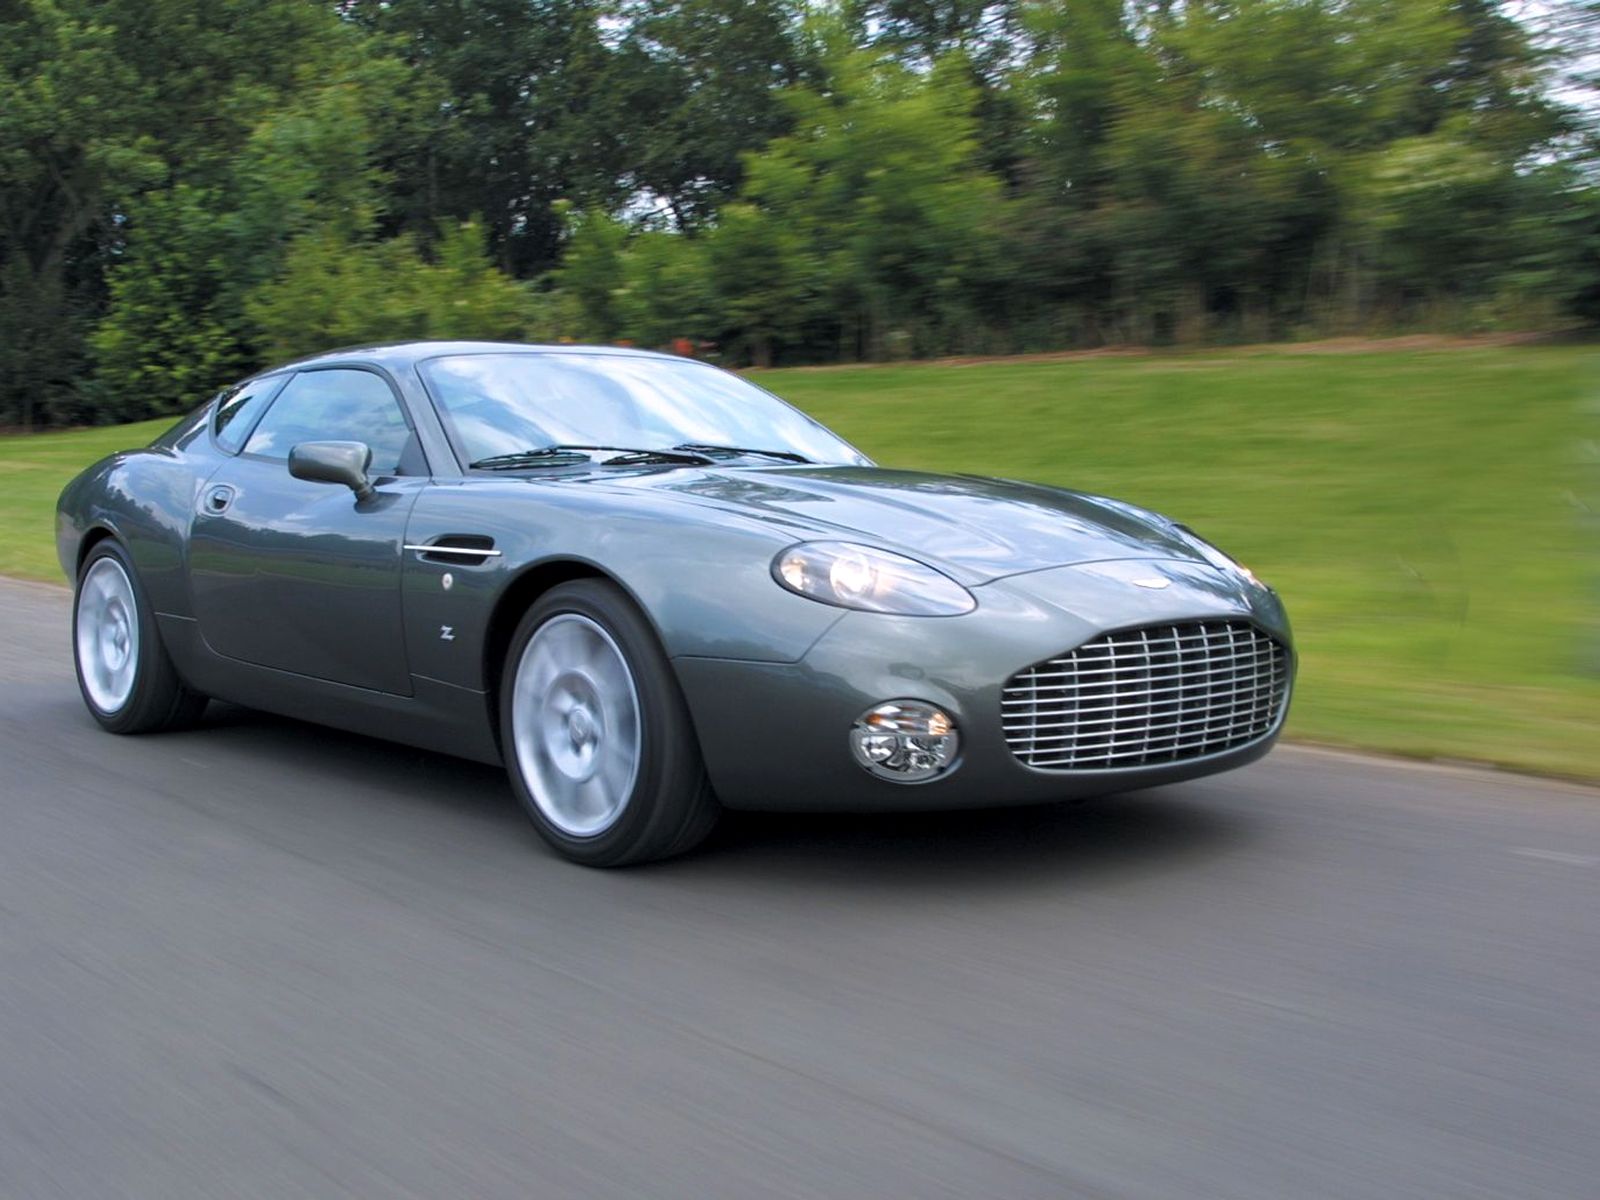 Aston Martin DB7 Backgrounds on Wallpapers Vista